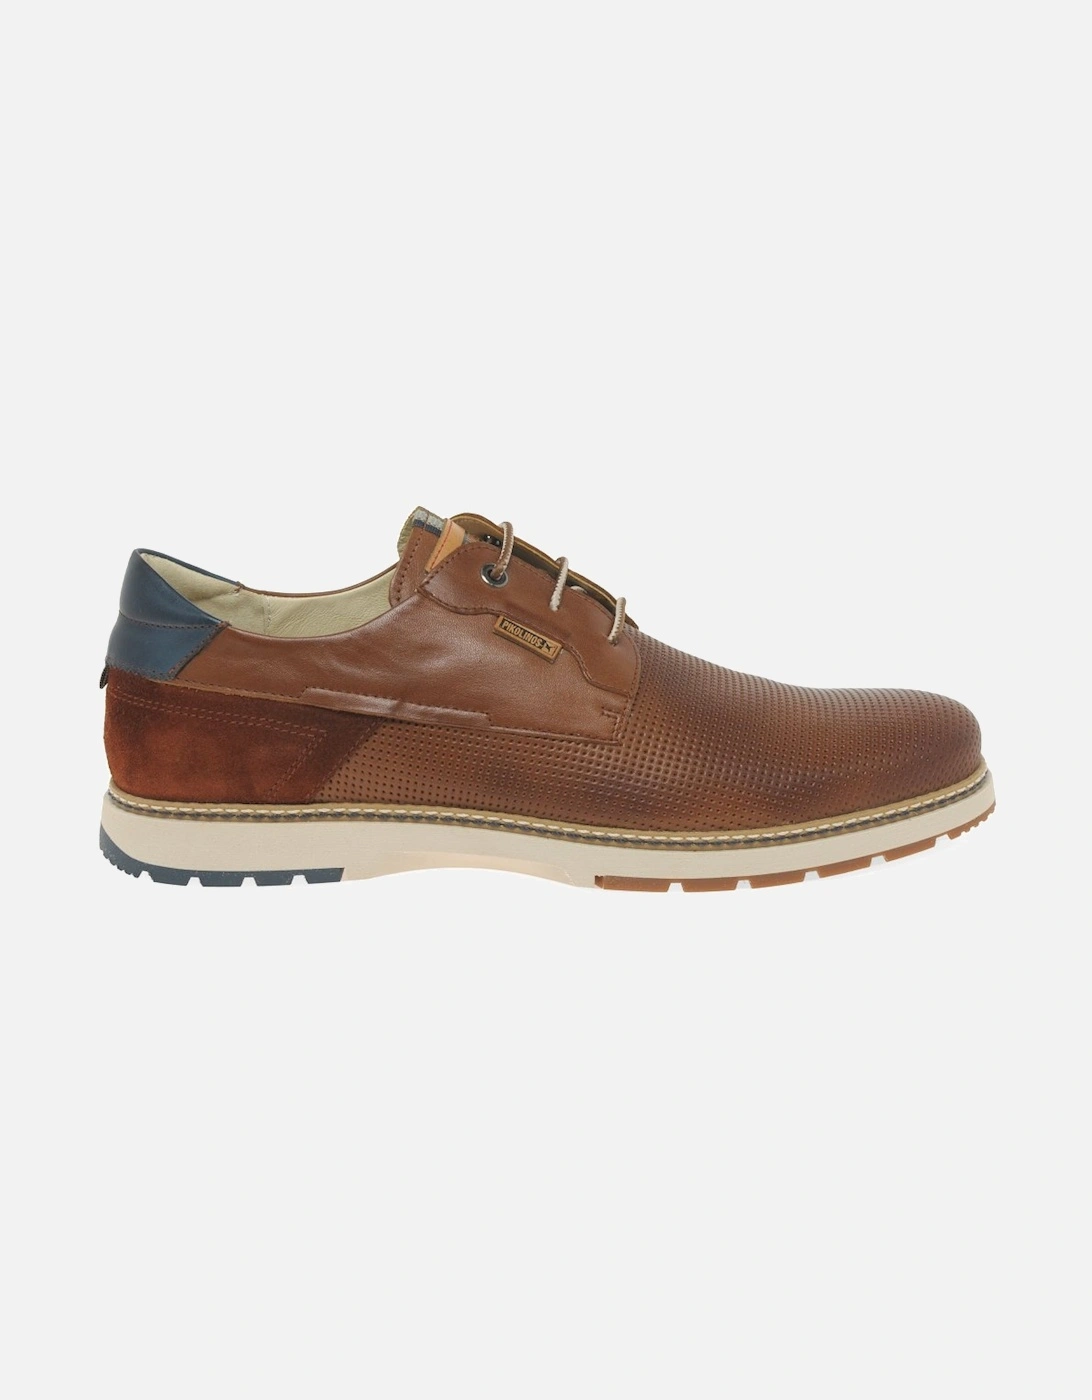 Ology Mens Shoes